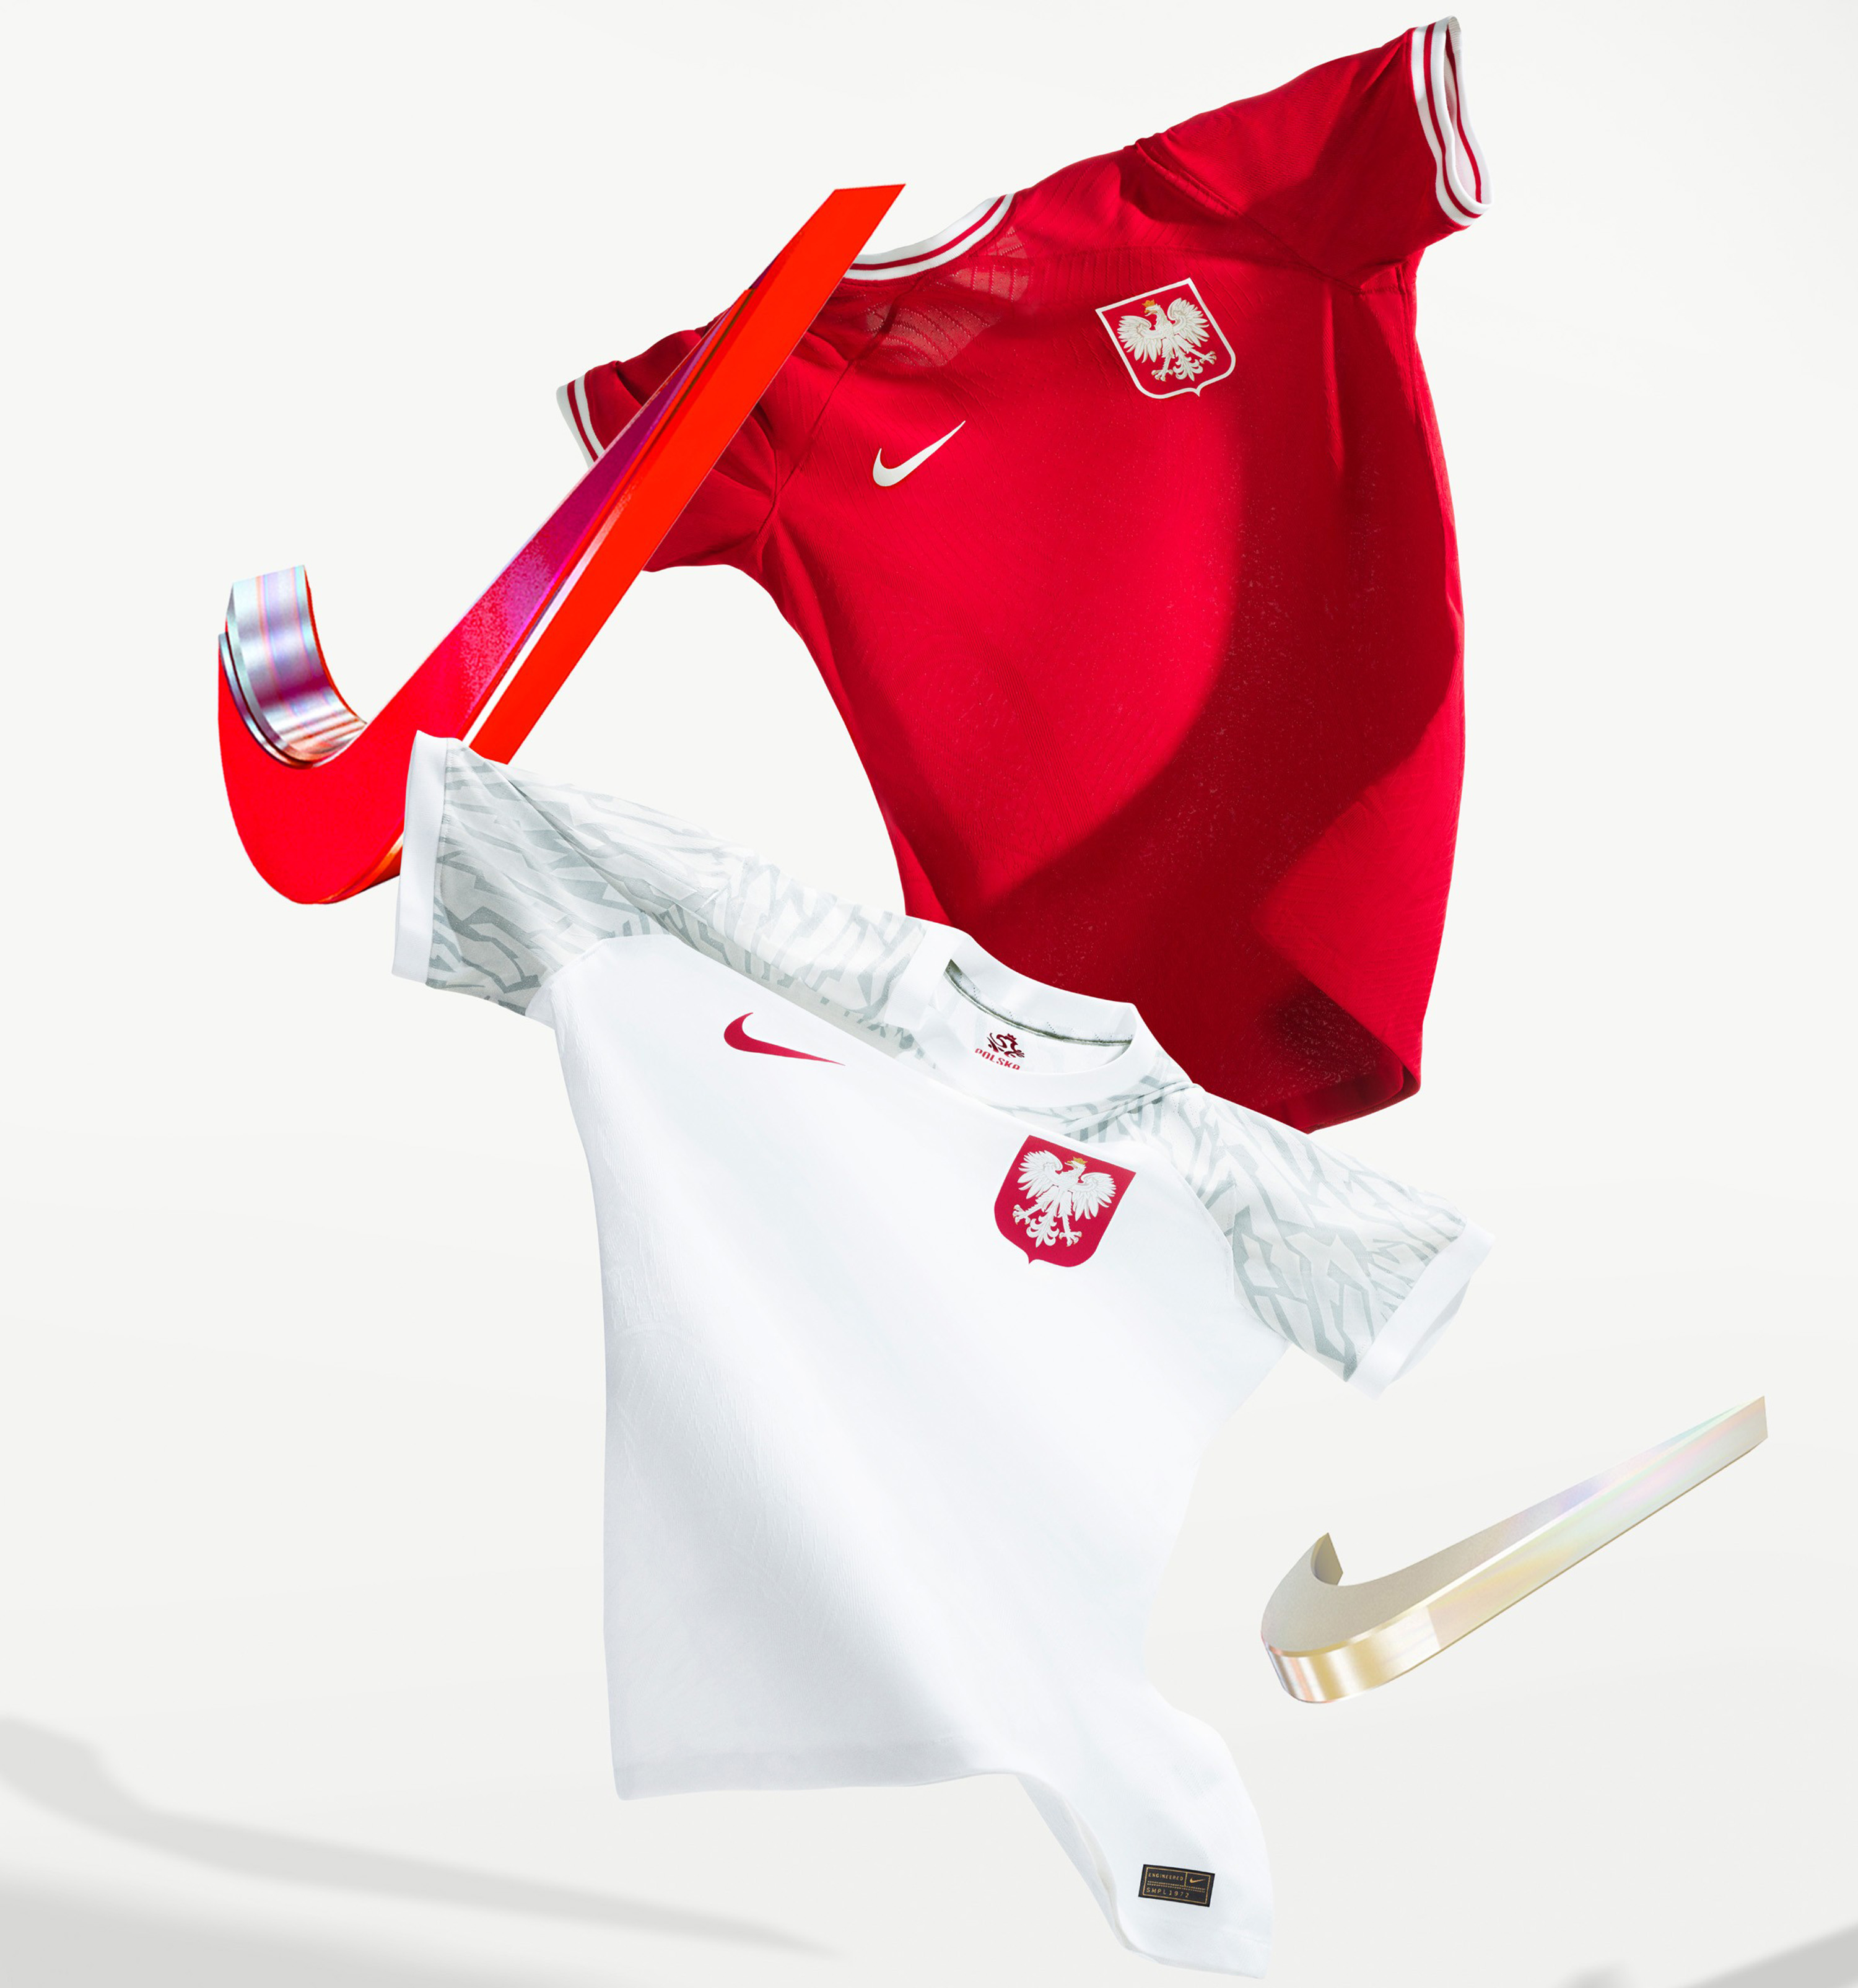 Nike's World Cup kits - United States, Netherlands miss the mark, but  Brazil and Portugal good - ESPN